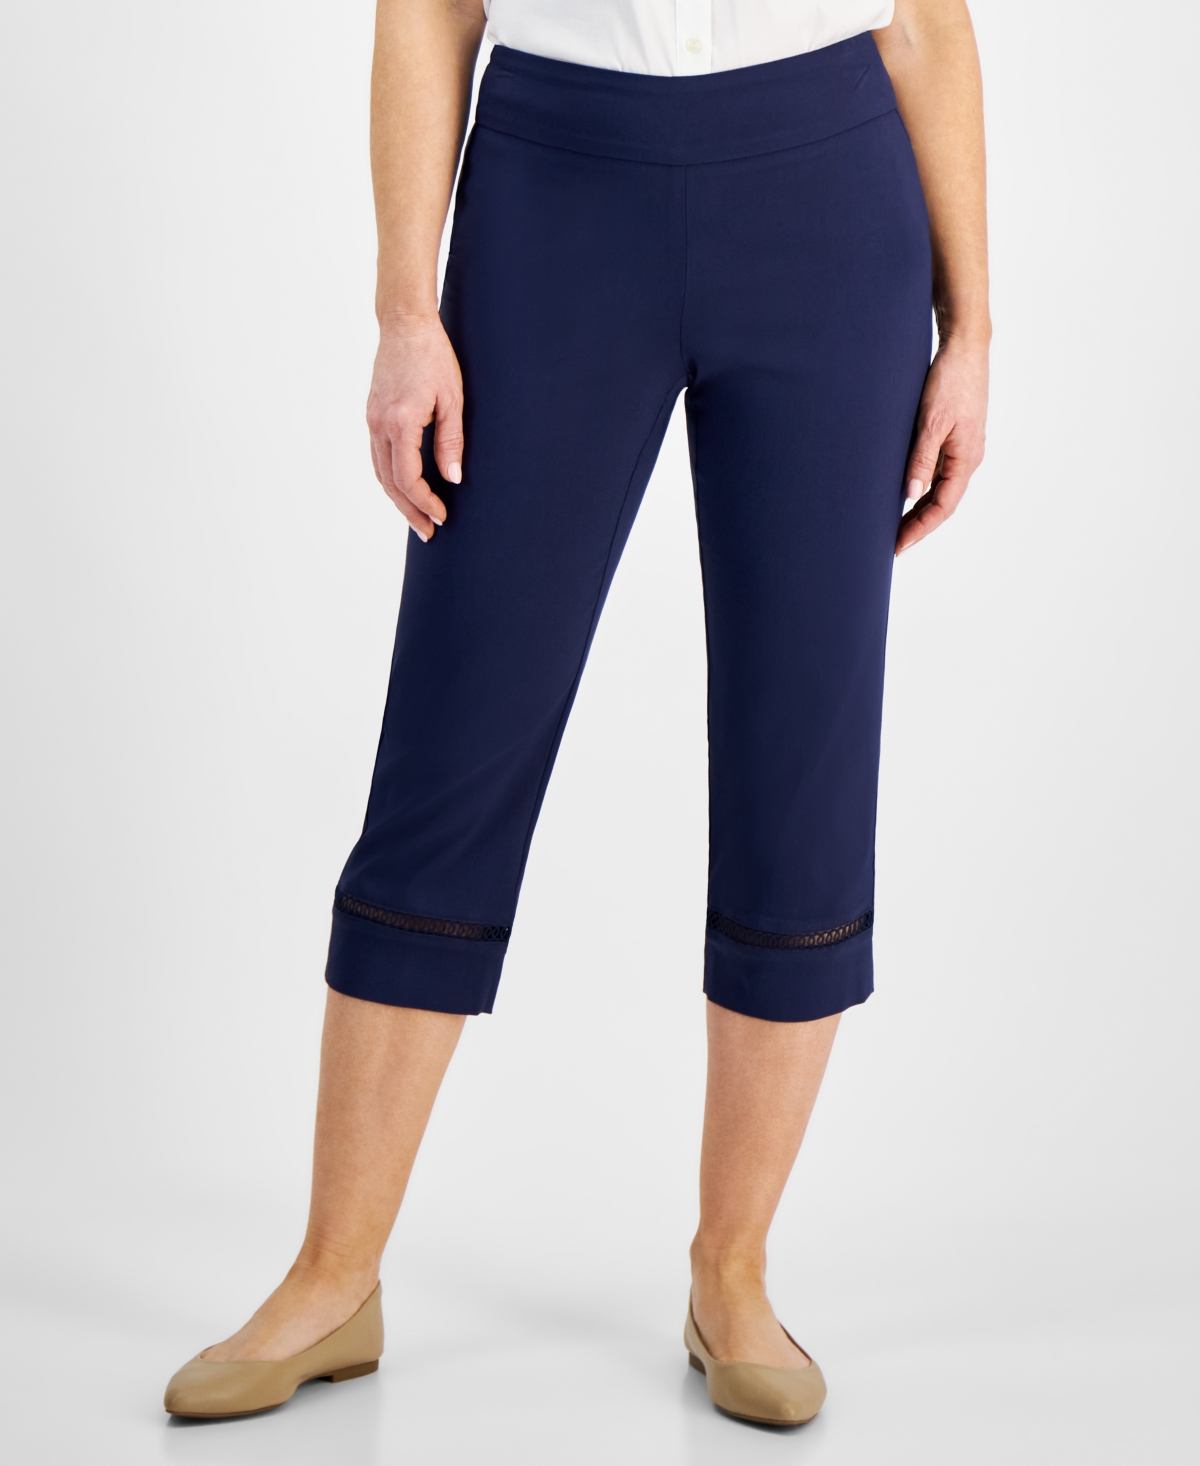 Jm Collection Petite Mid Rise Pull-on Capri Pants, Created For Macy's In Intrepid Blue